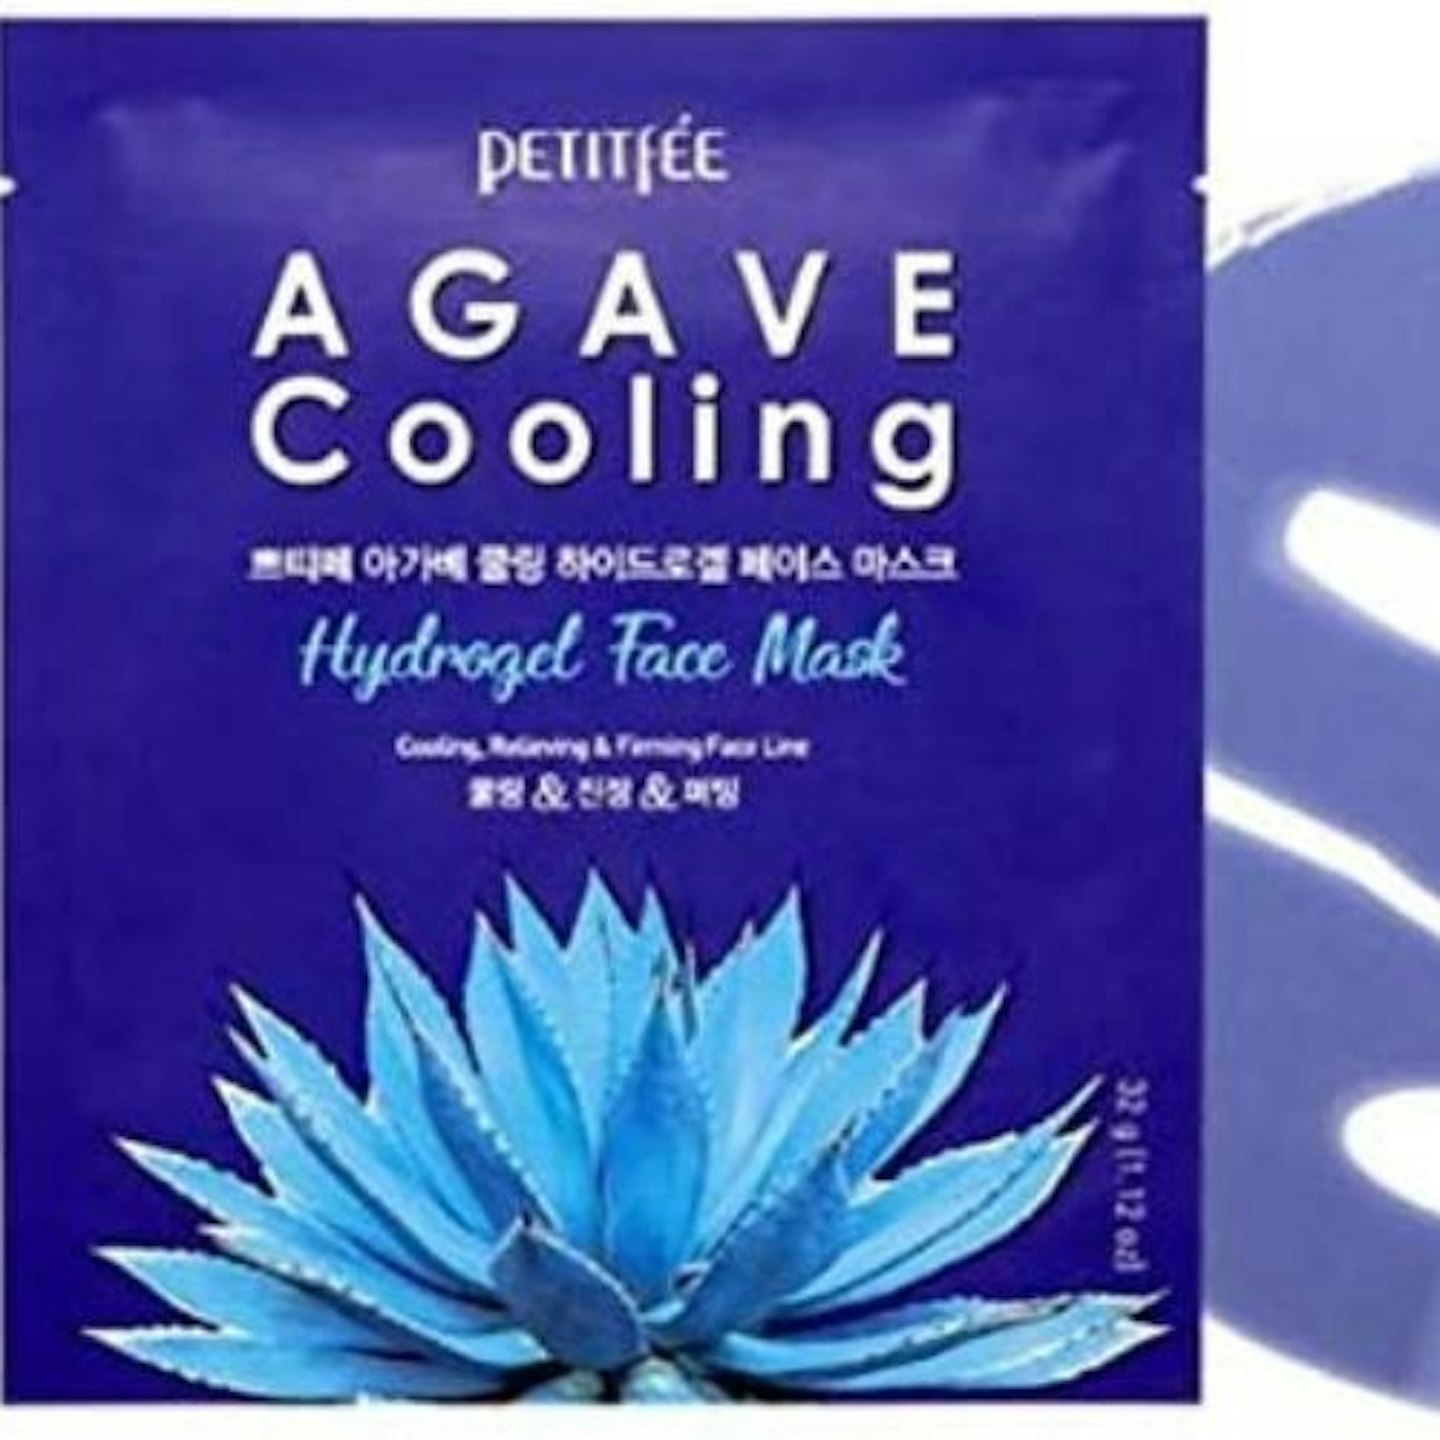 Petitfee-Agave-Cooling-Hydrogel-Face-Mask